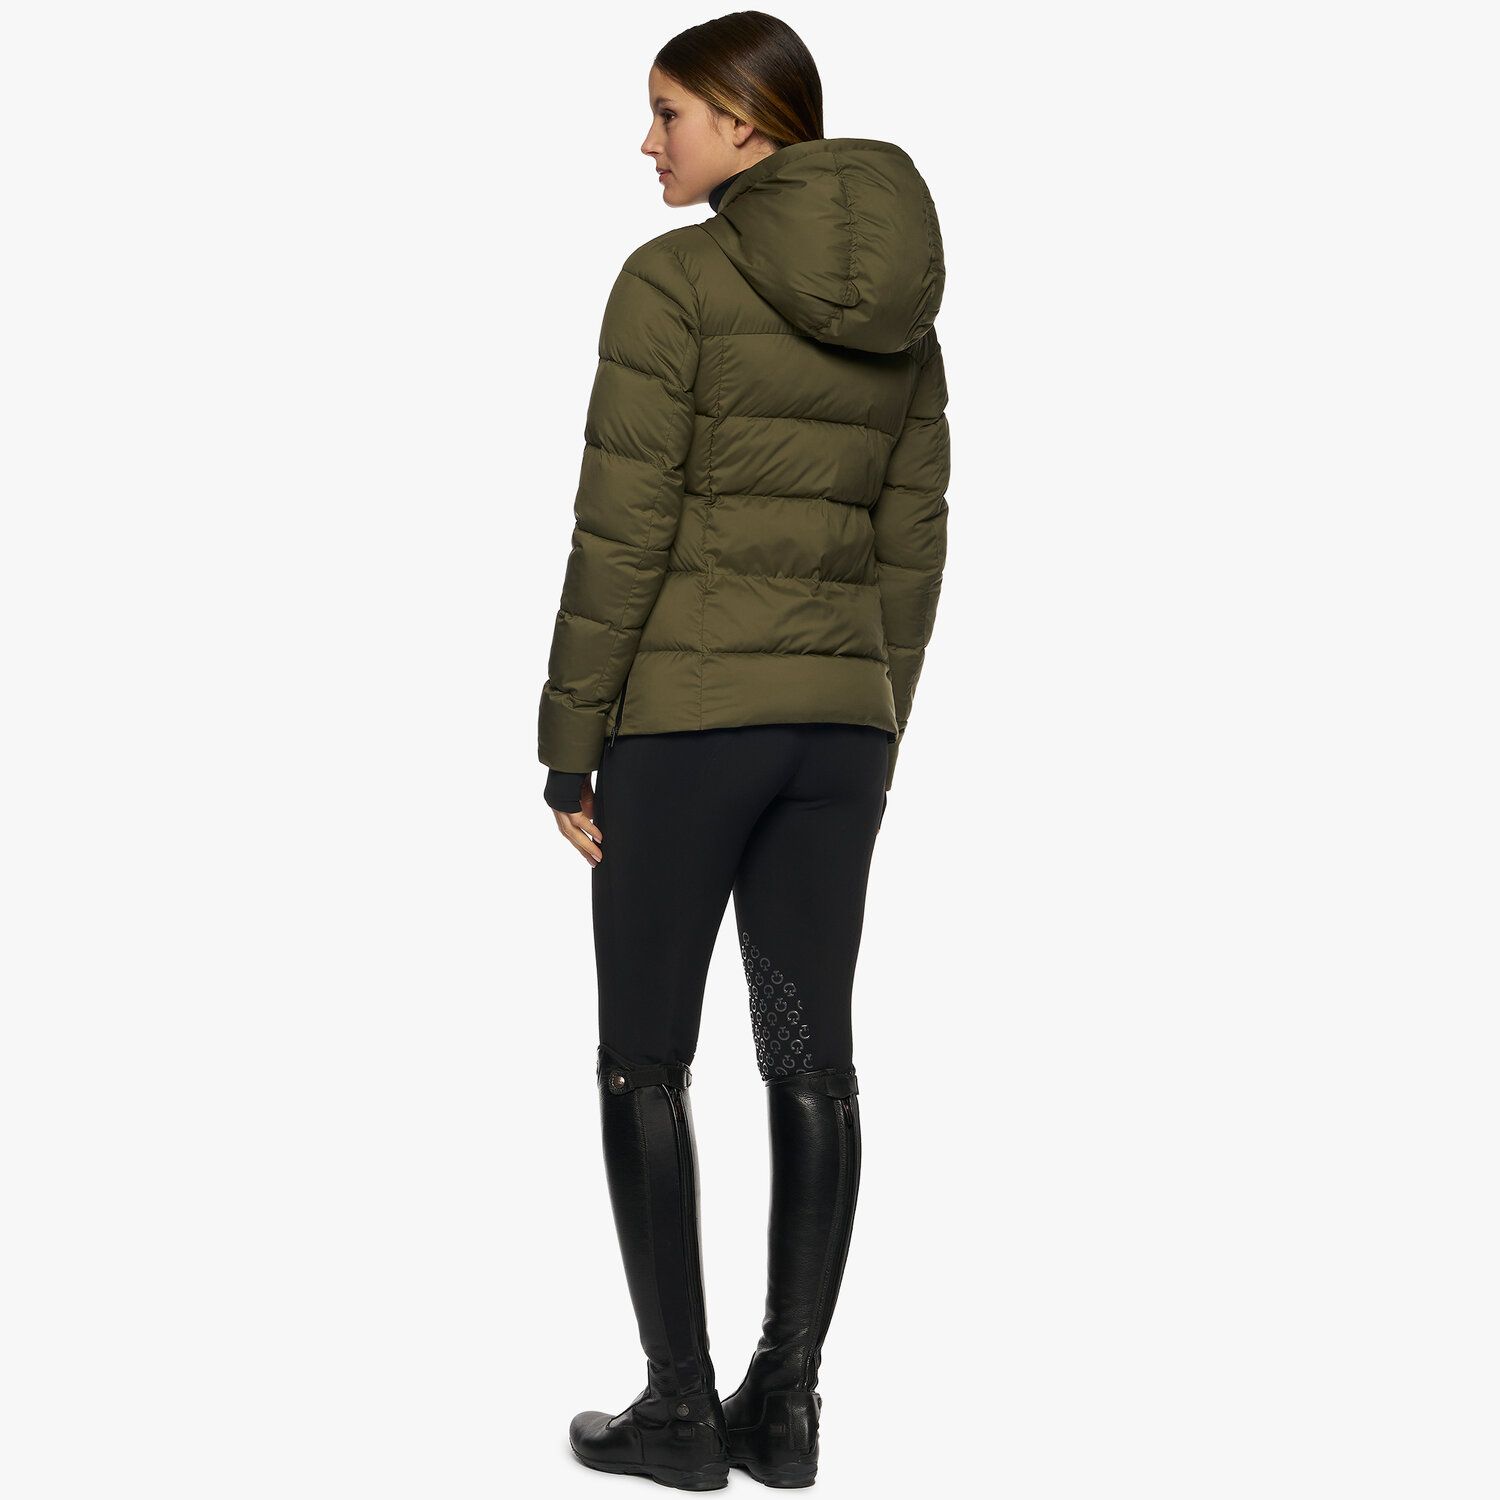 Cavalleria Toscana Women’s quilted nylon puffer jacket FOLIAGE GREEN-2